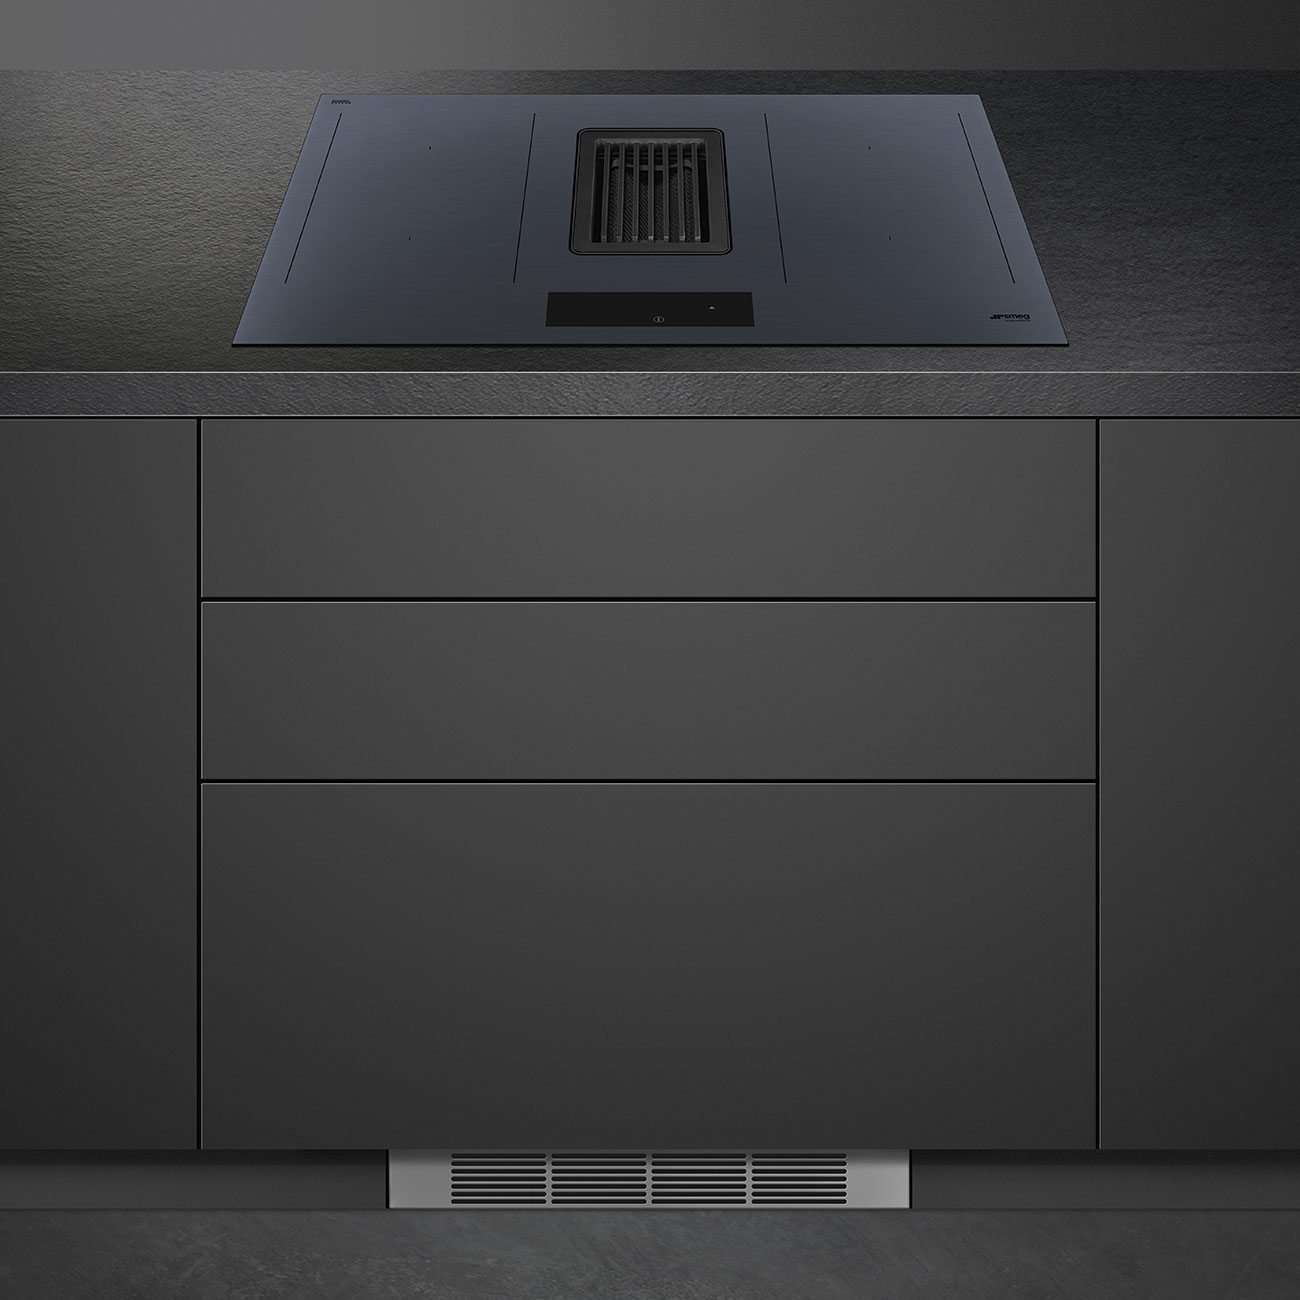 Induction with integrated hood Hob Smeg_7